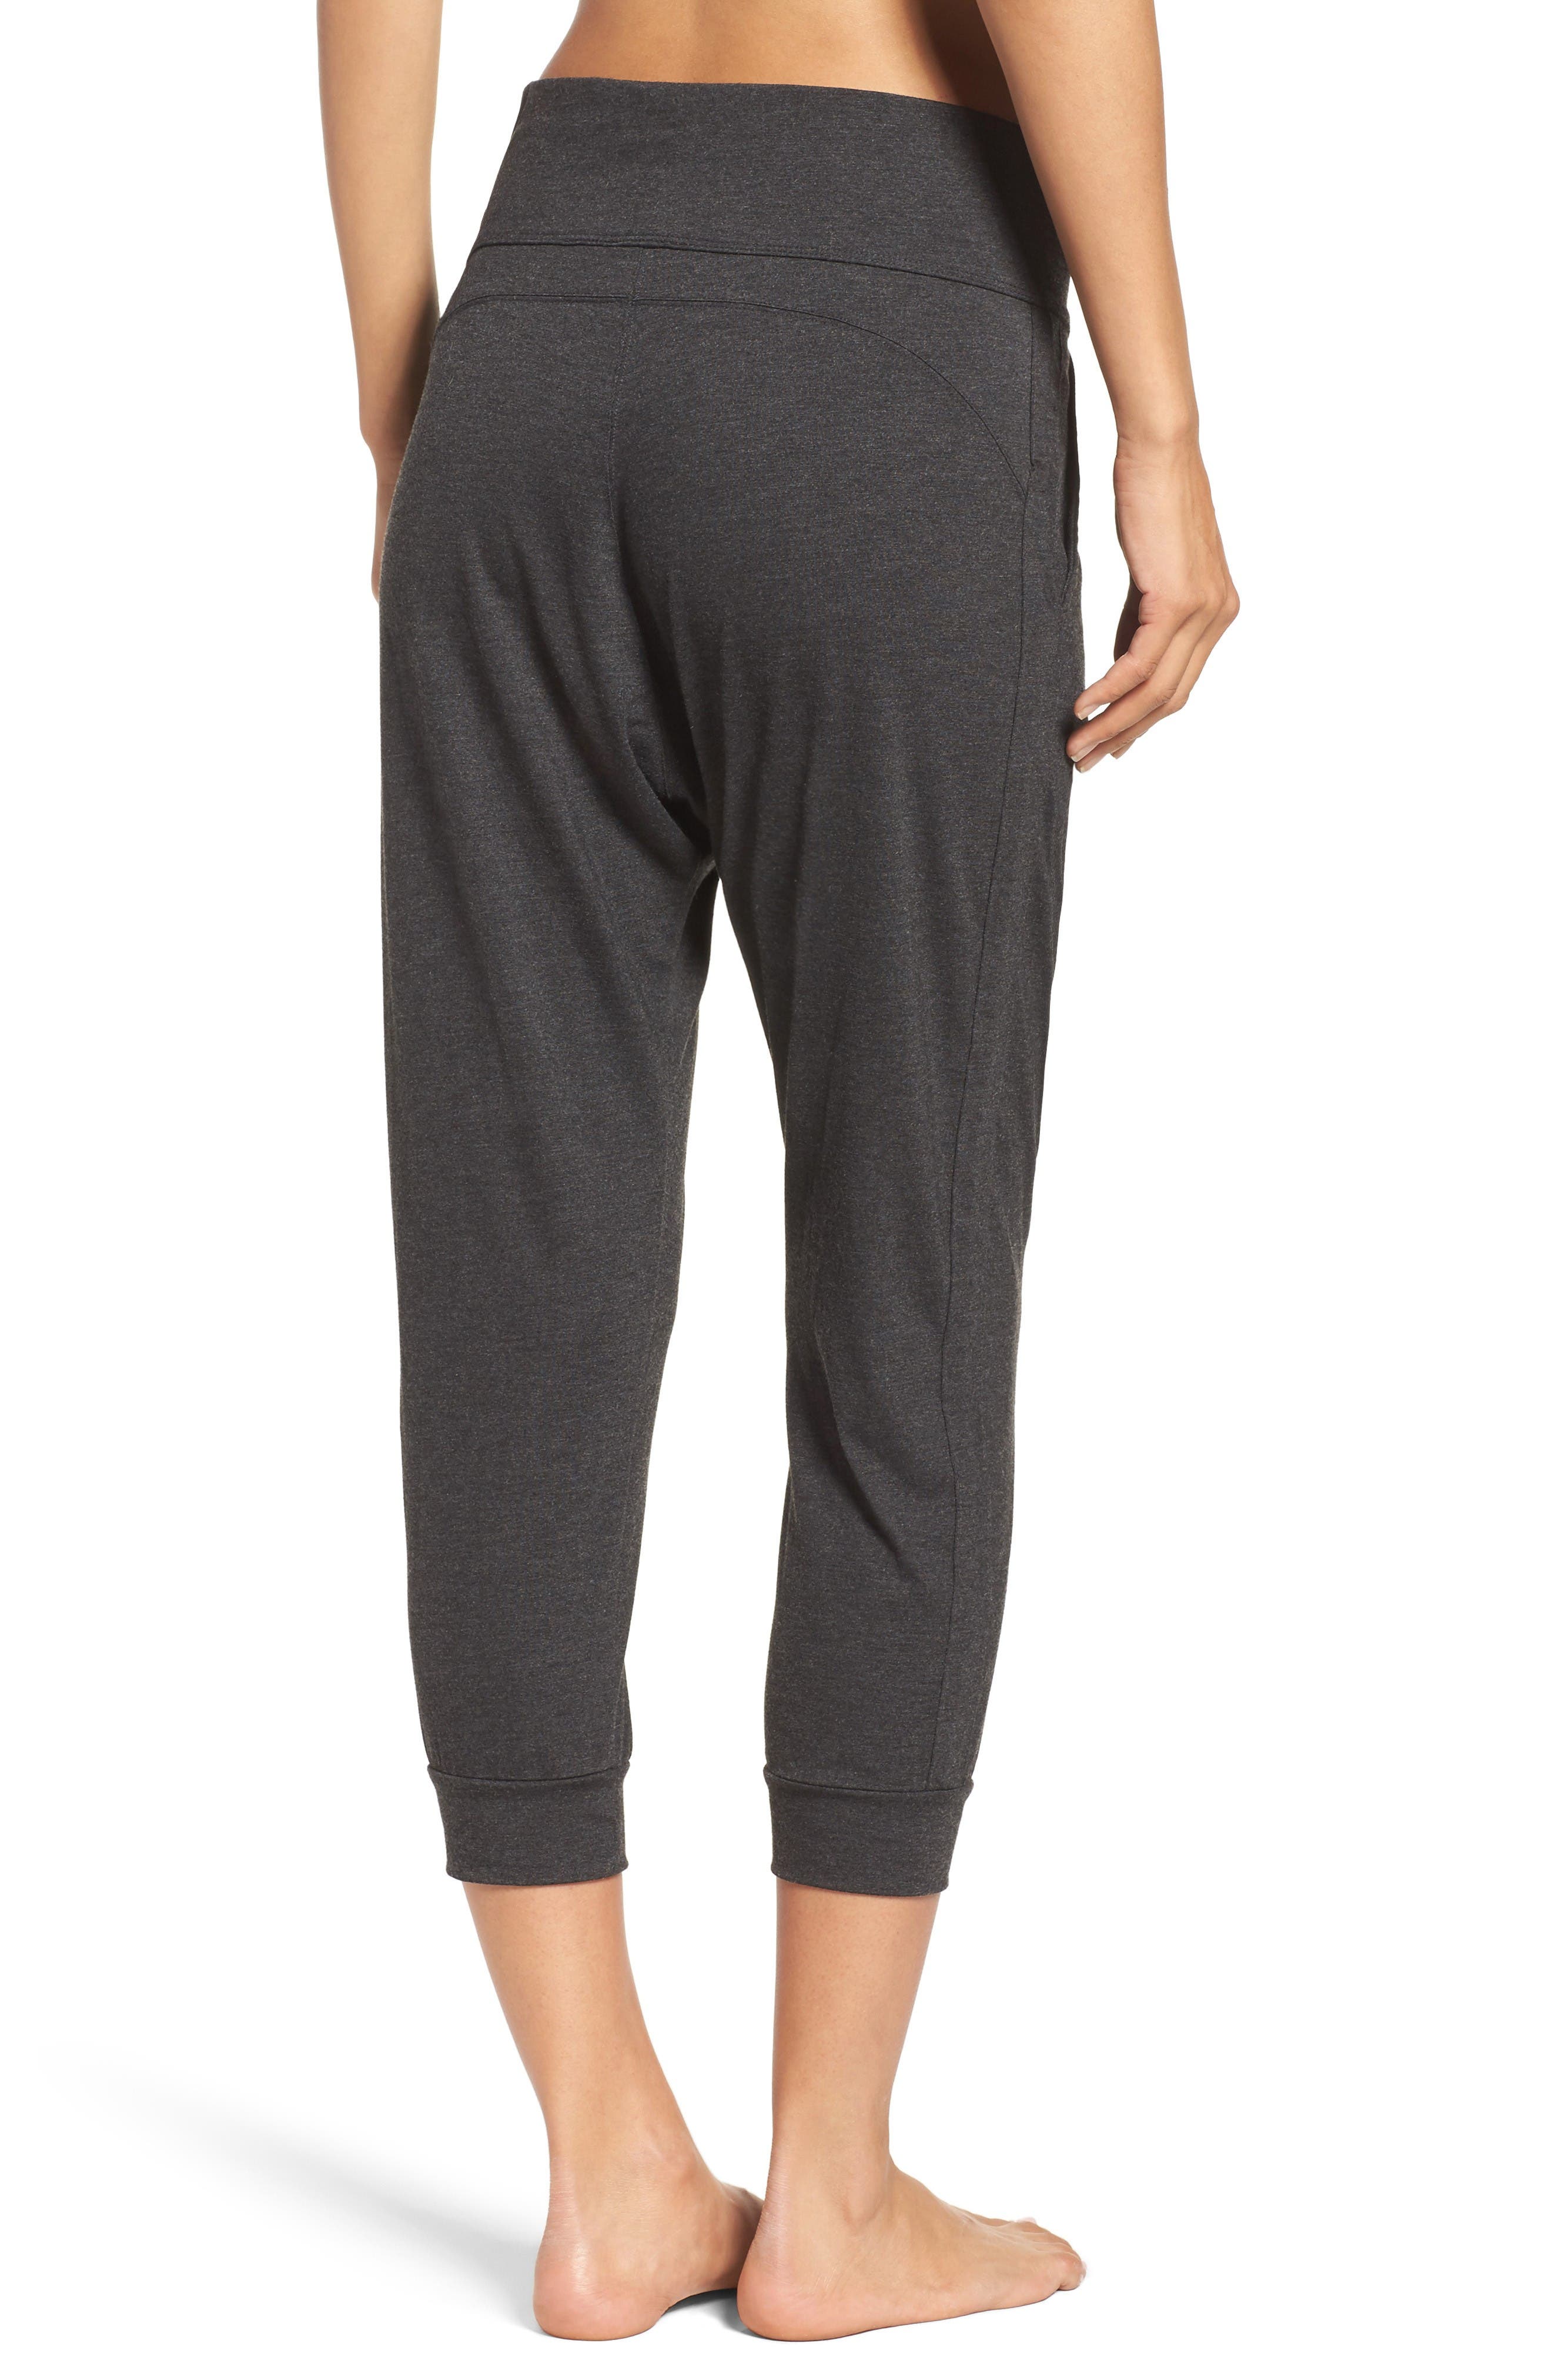 Relaxed Fit Yoga Clothes: Yogawear and Yoga Apparel | Nordstrom